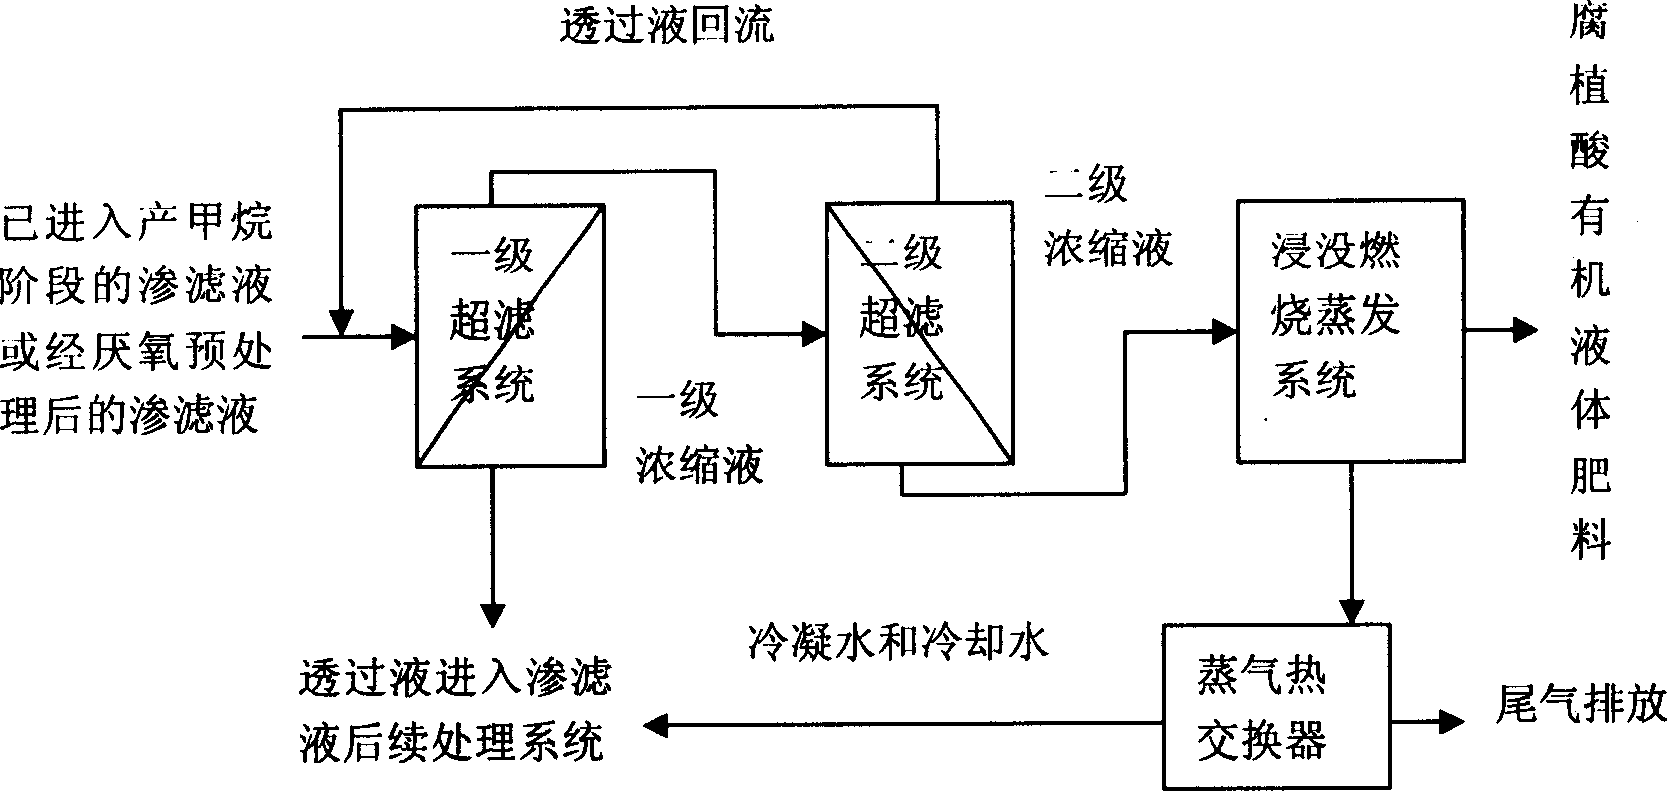 Resource process for percolation liquid of city life garbage landfill